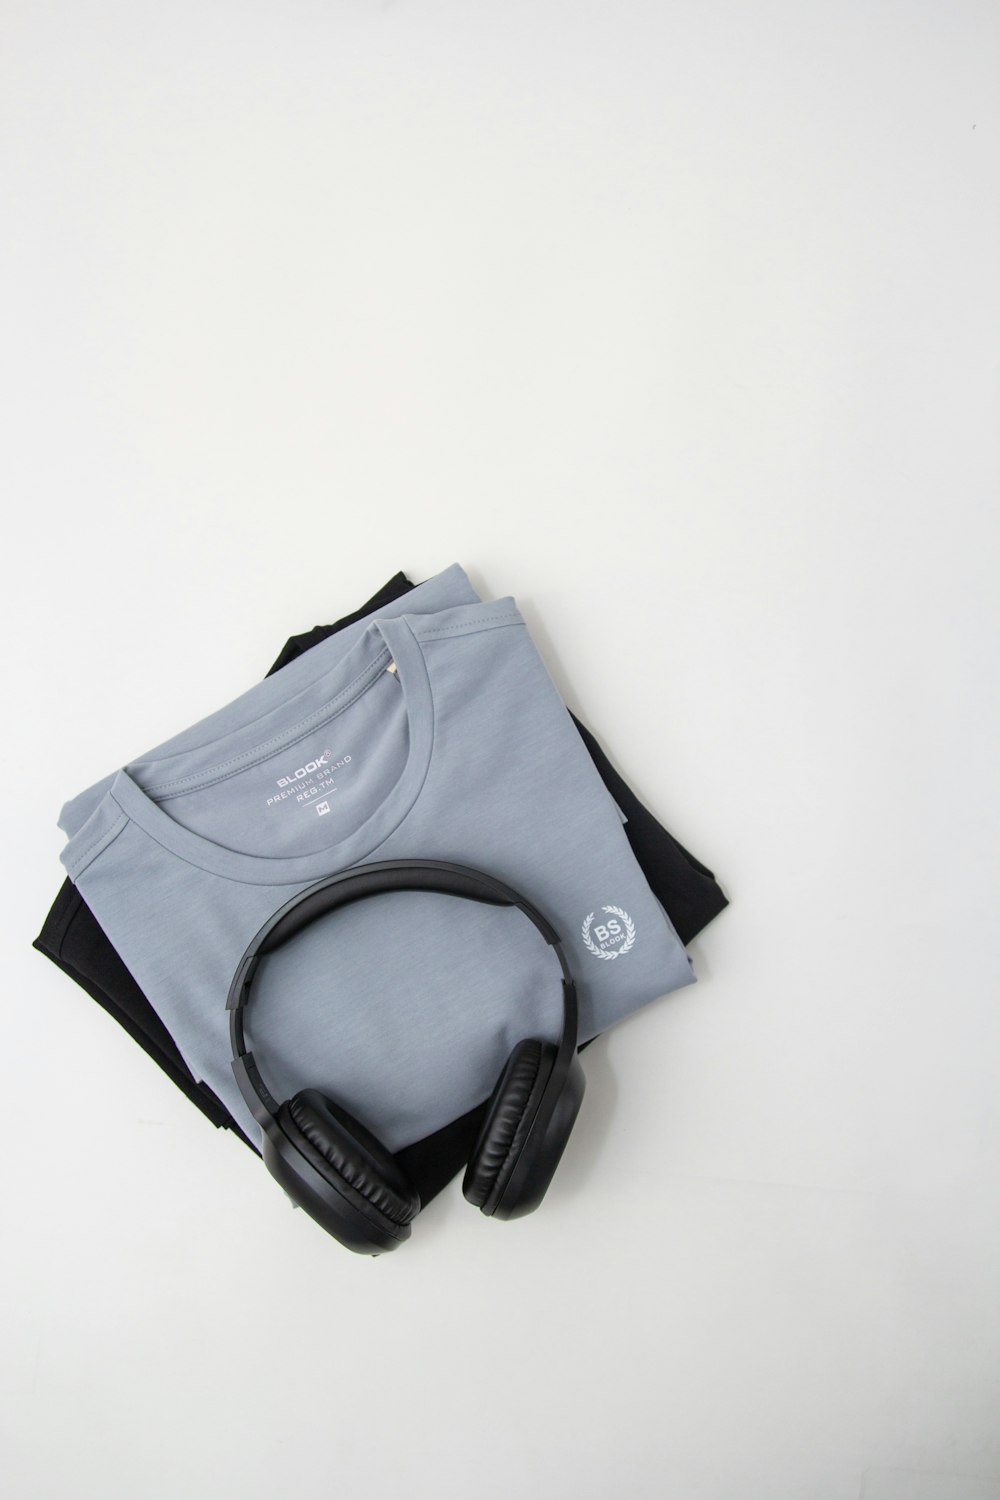 a pair of headphones sitting on top of a t - shirt